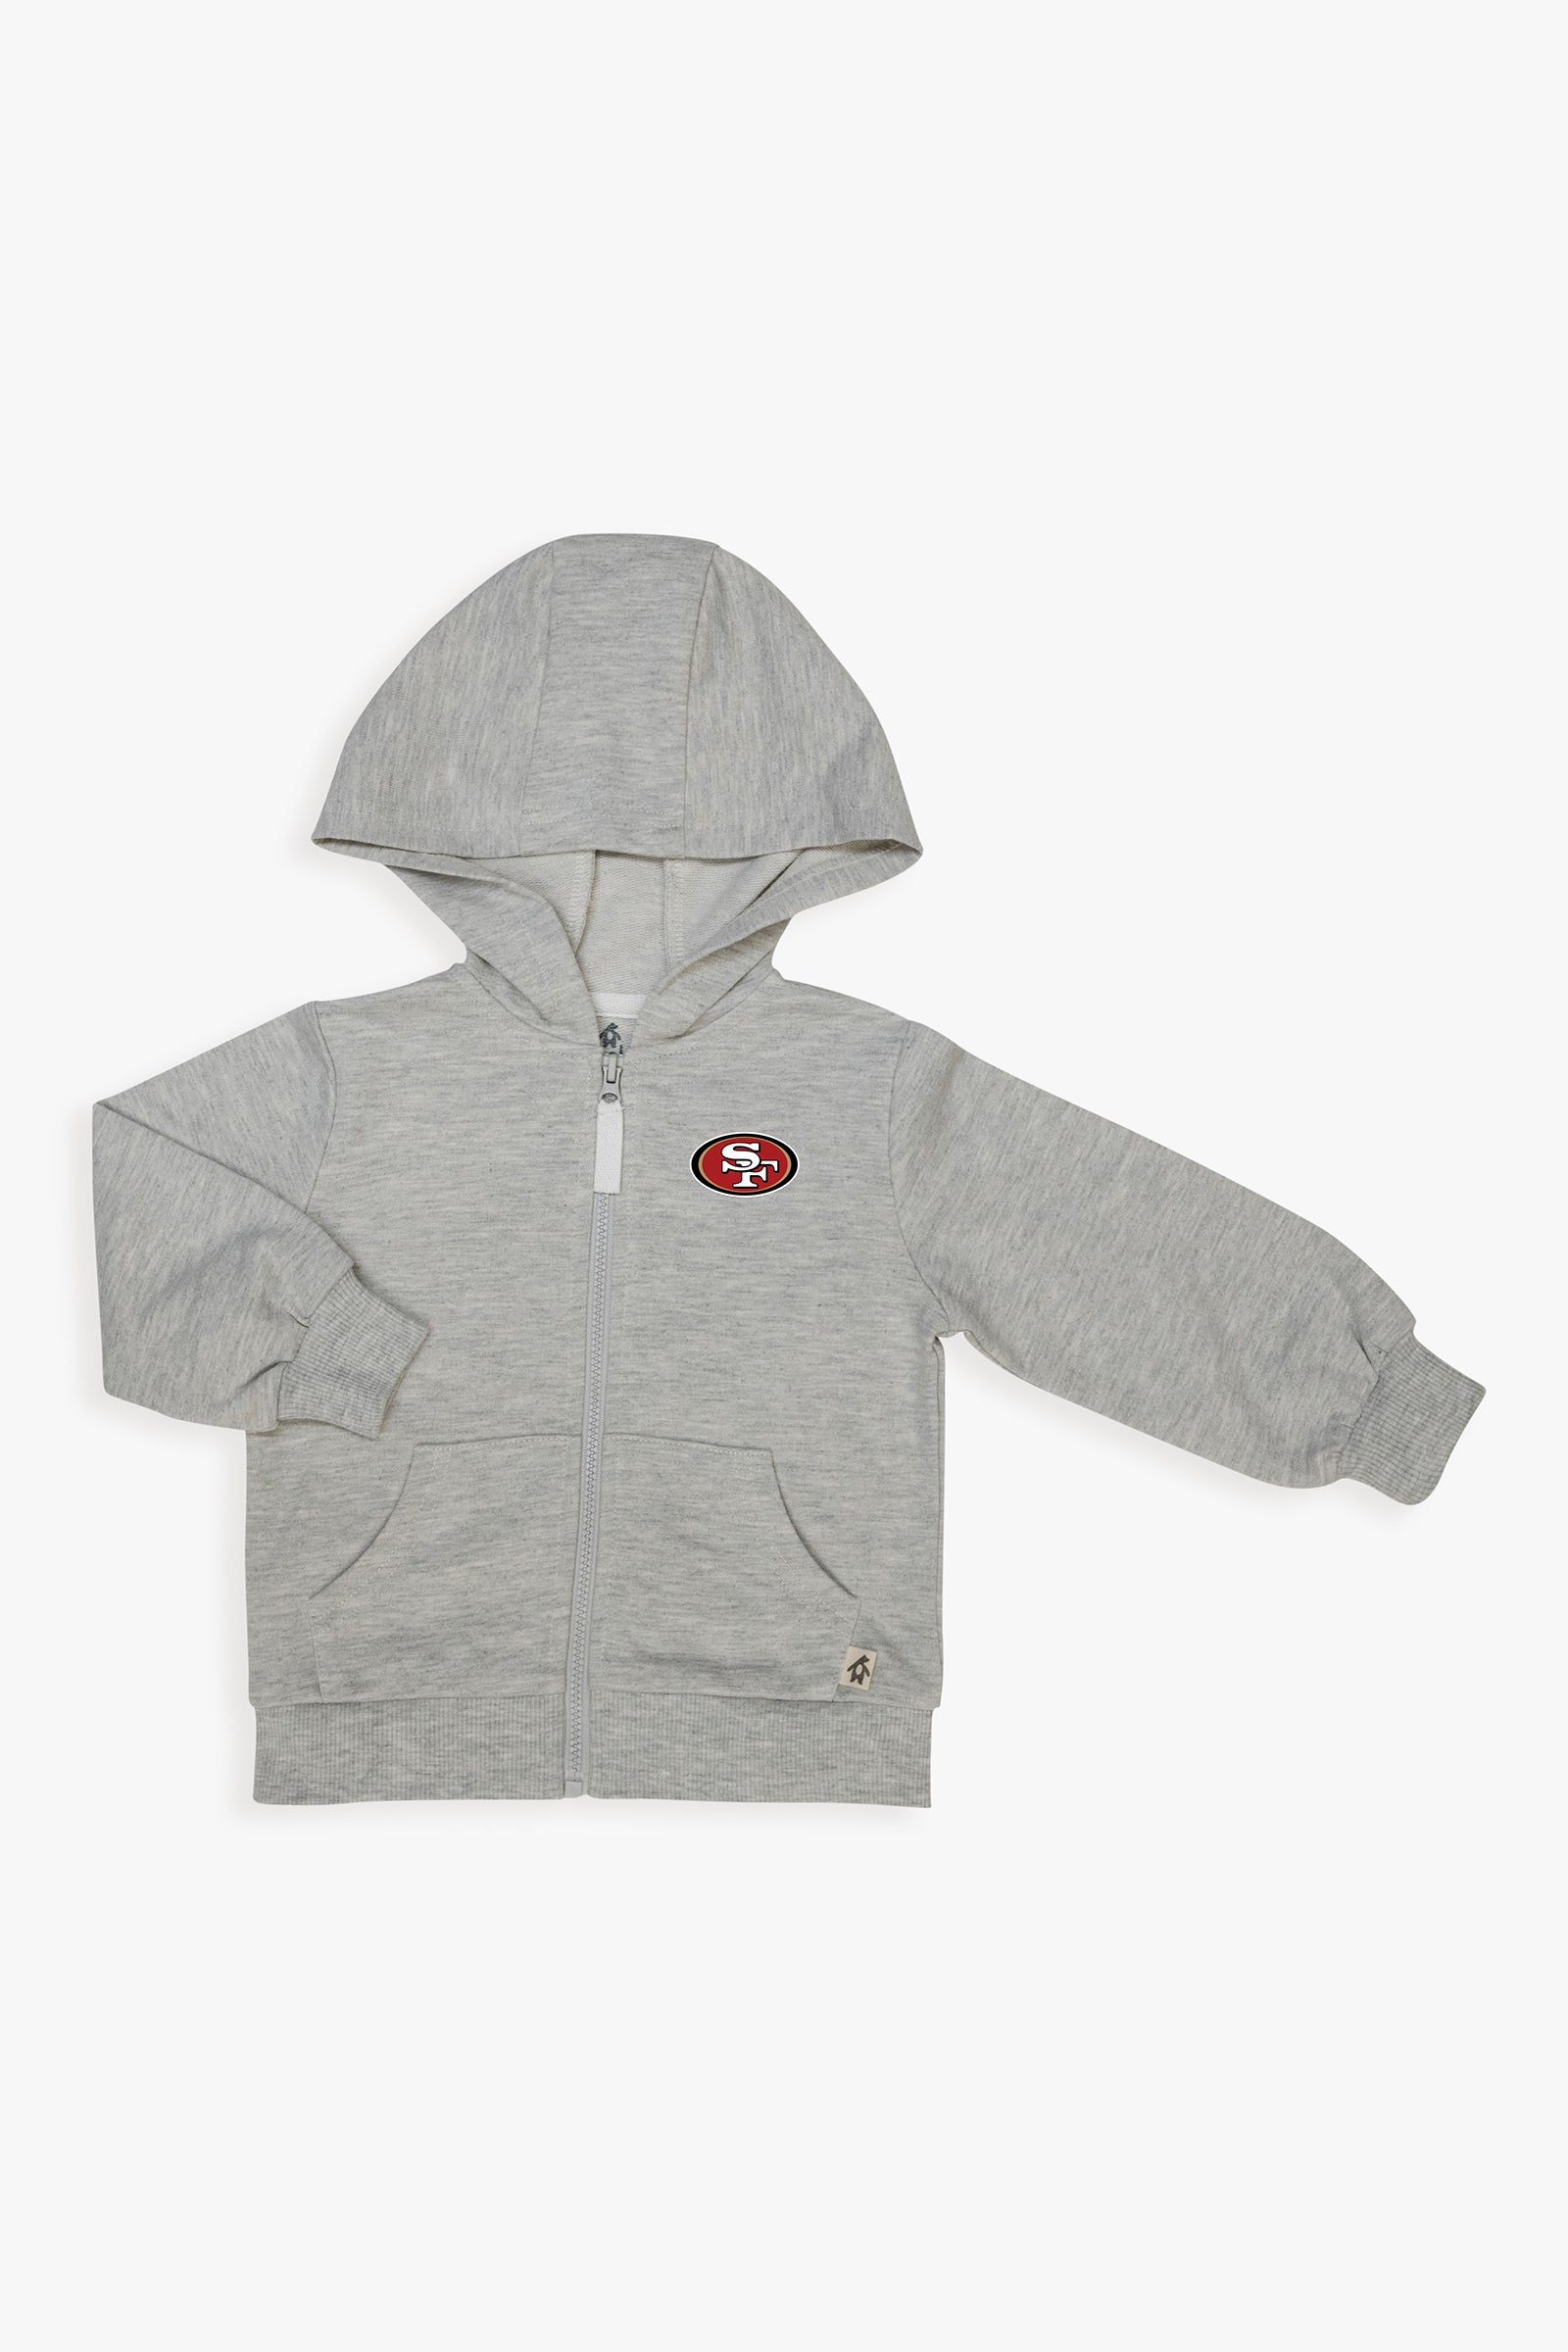 French NFL Toddler Grey Unisex Team Football Hoodie Baby Terry Logo Zip-Up